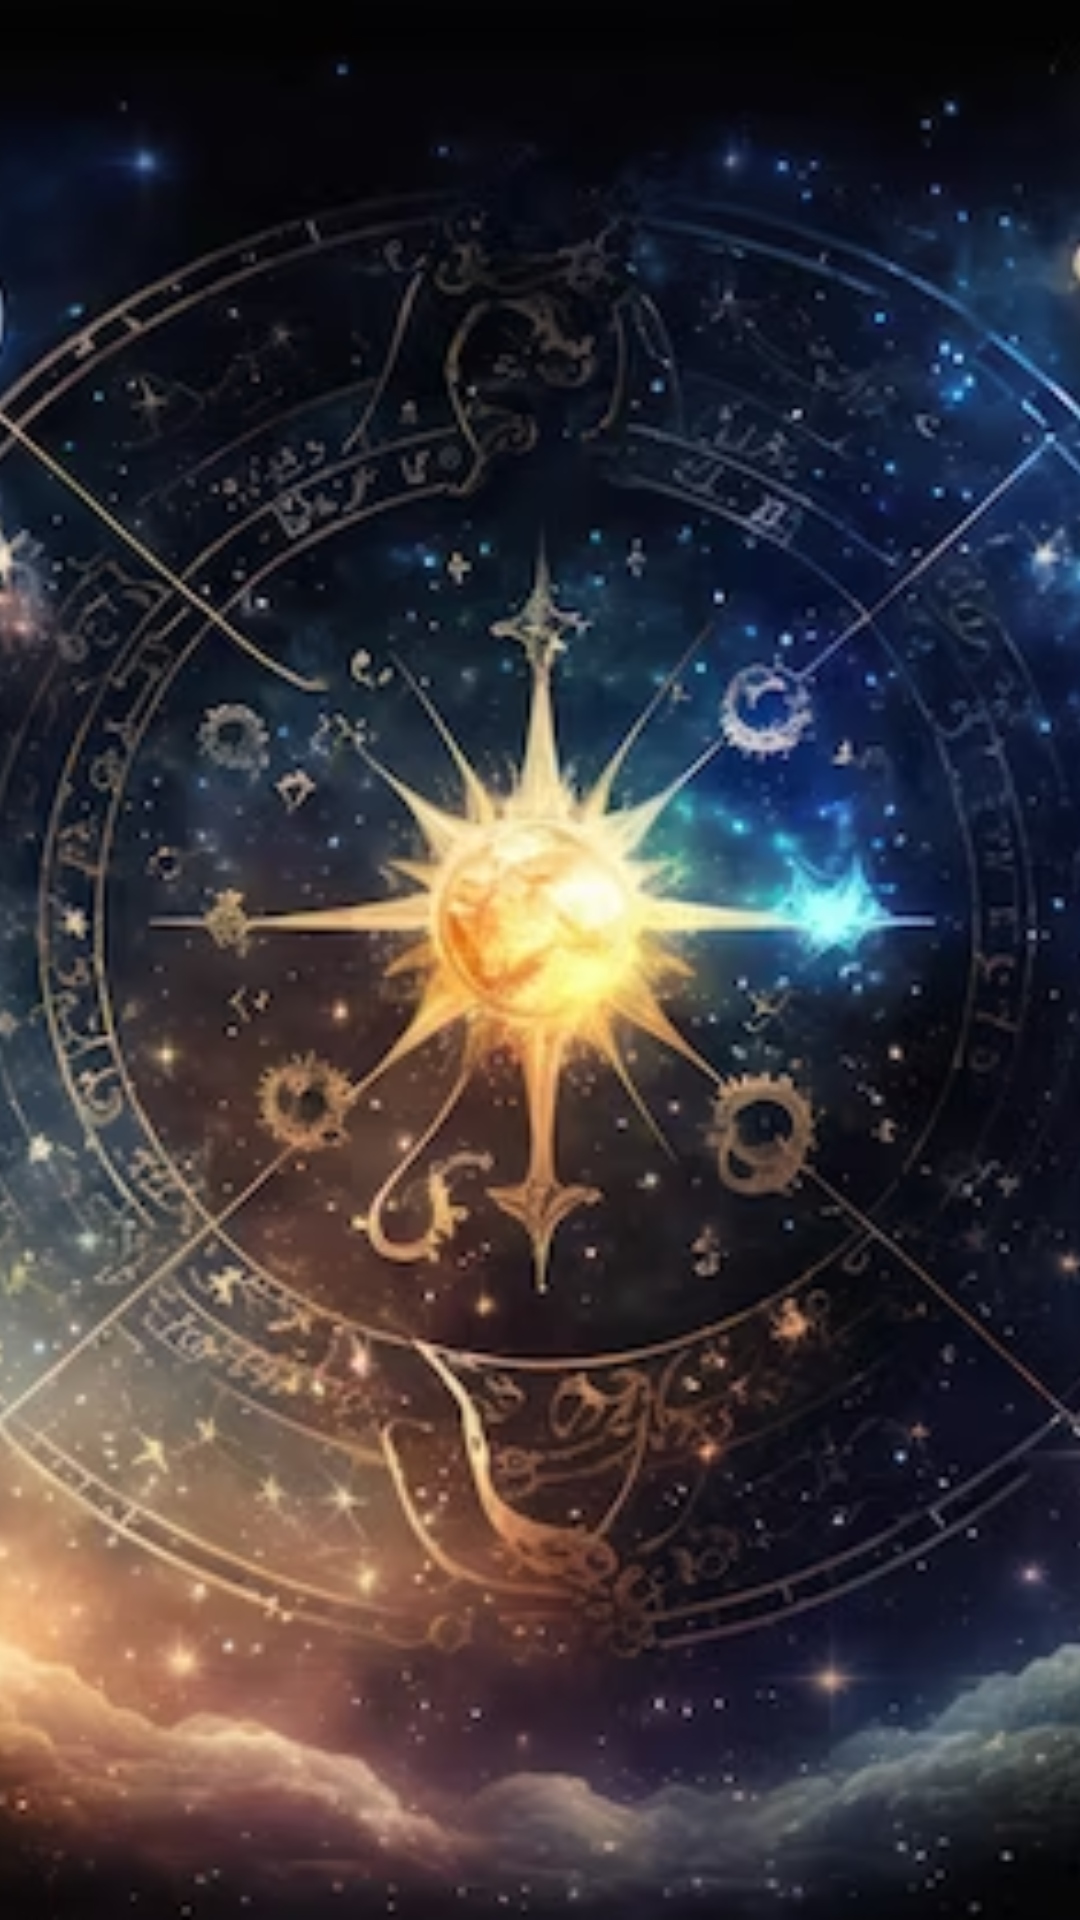 fixed igns in astrology